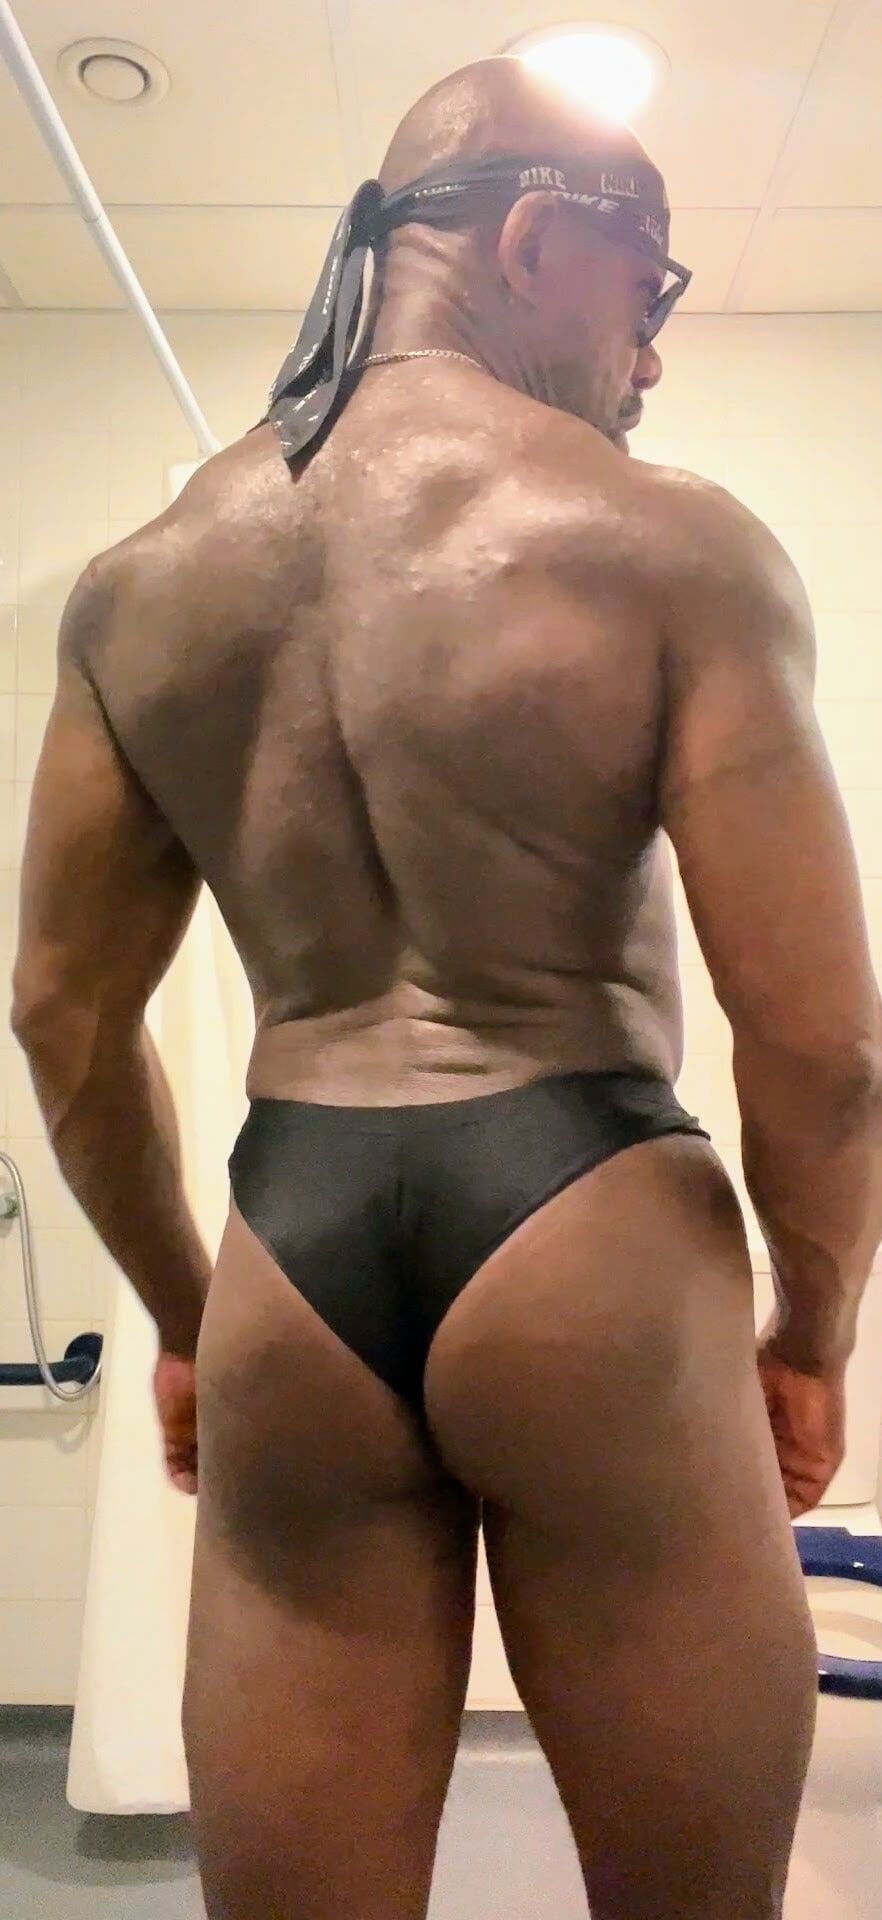  Muscle Butt Dad #10